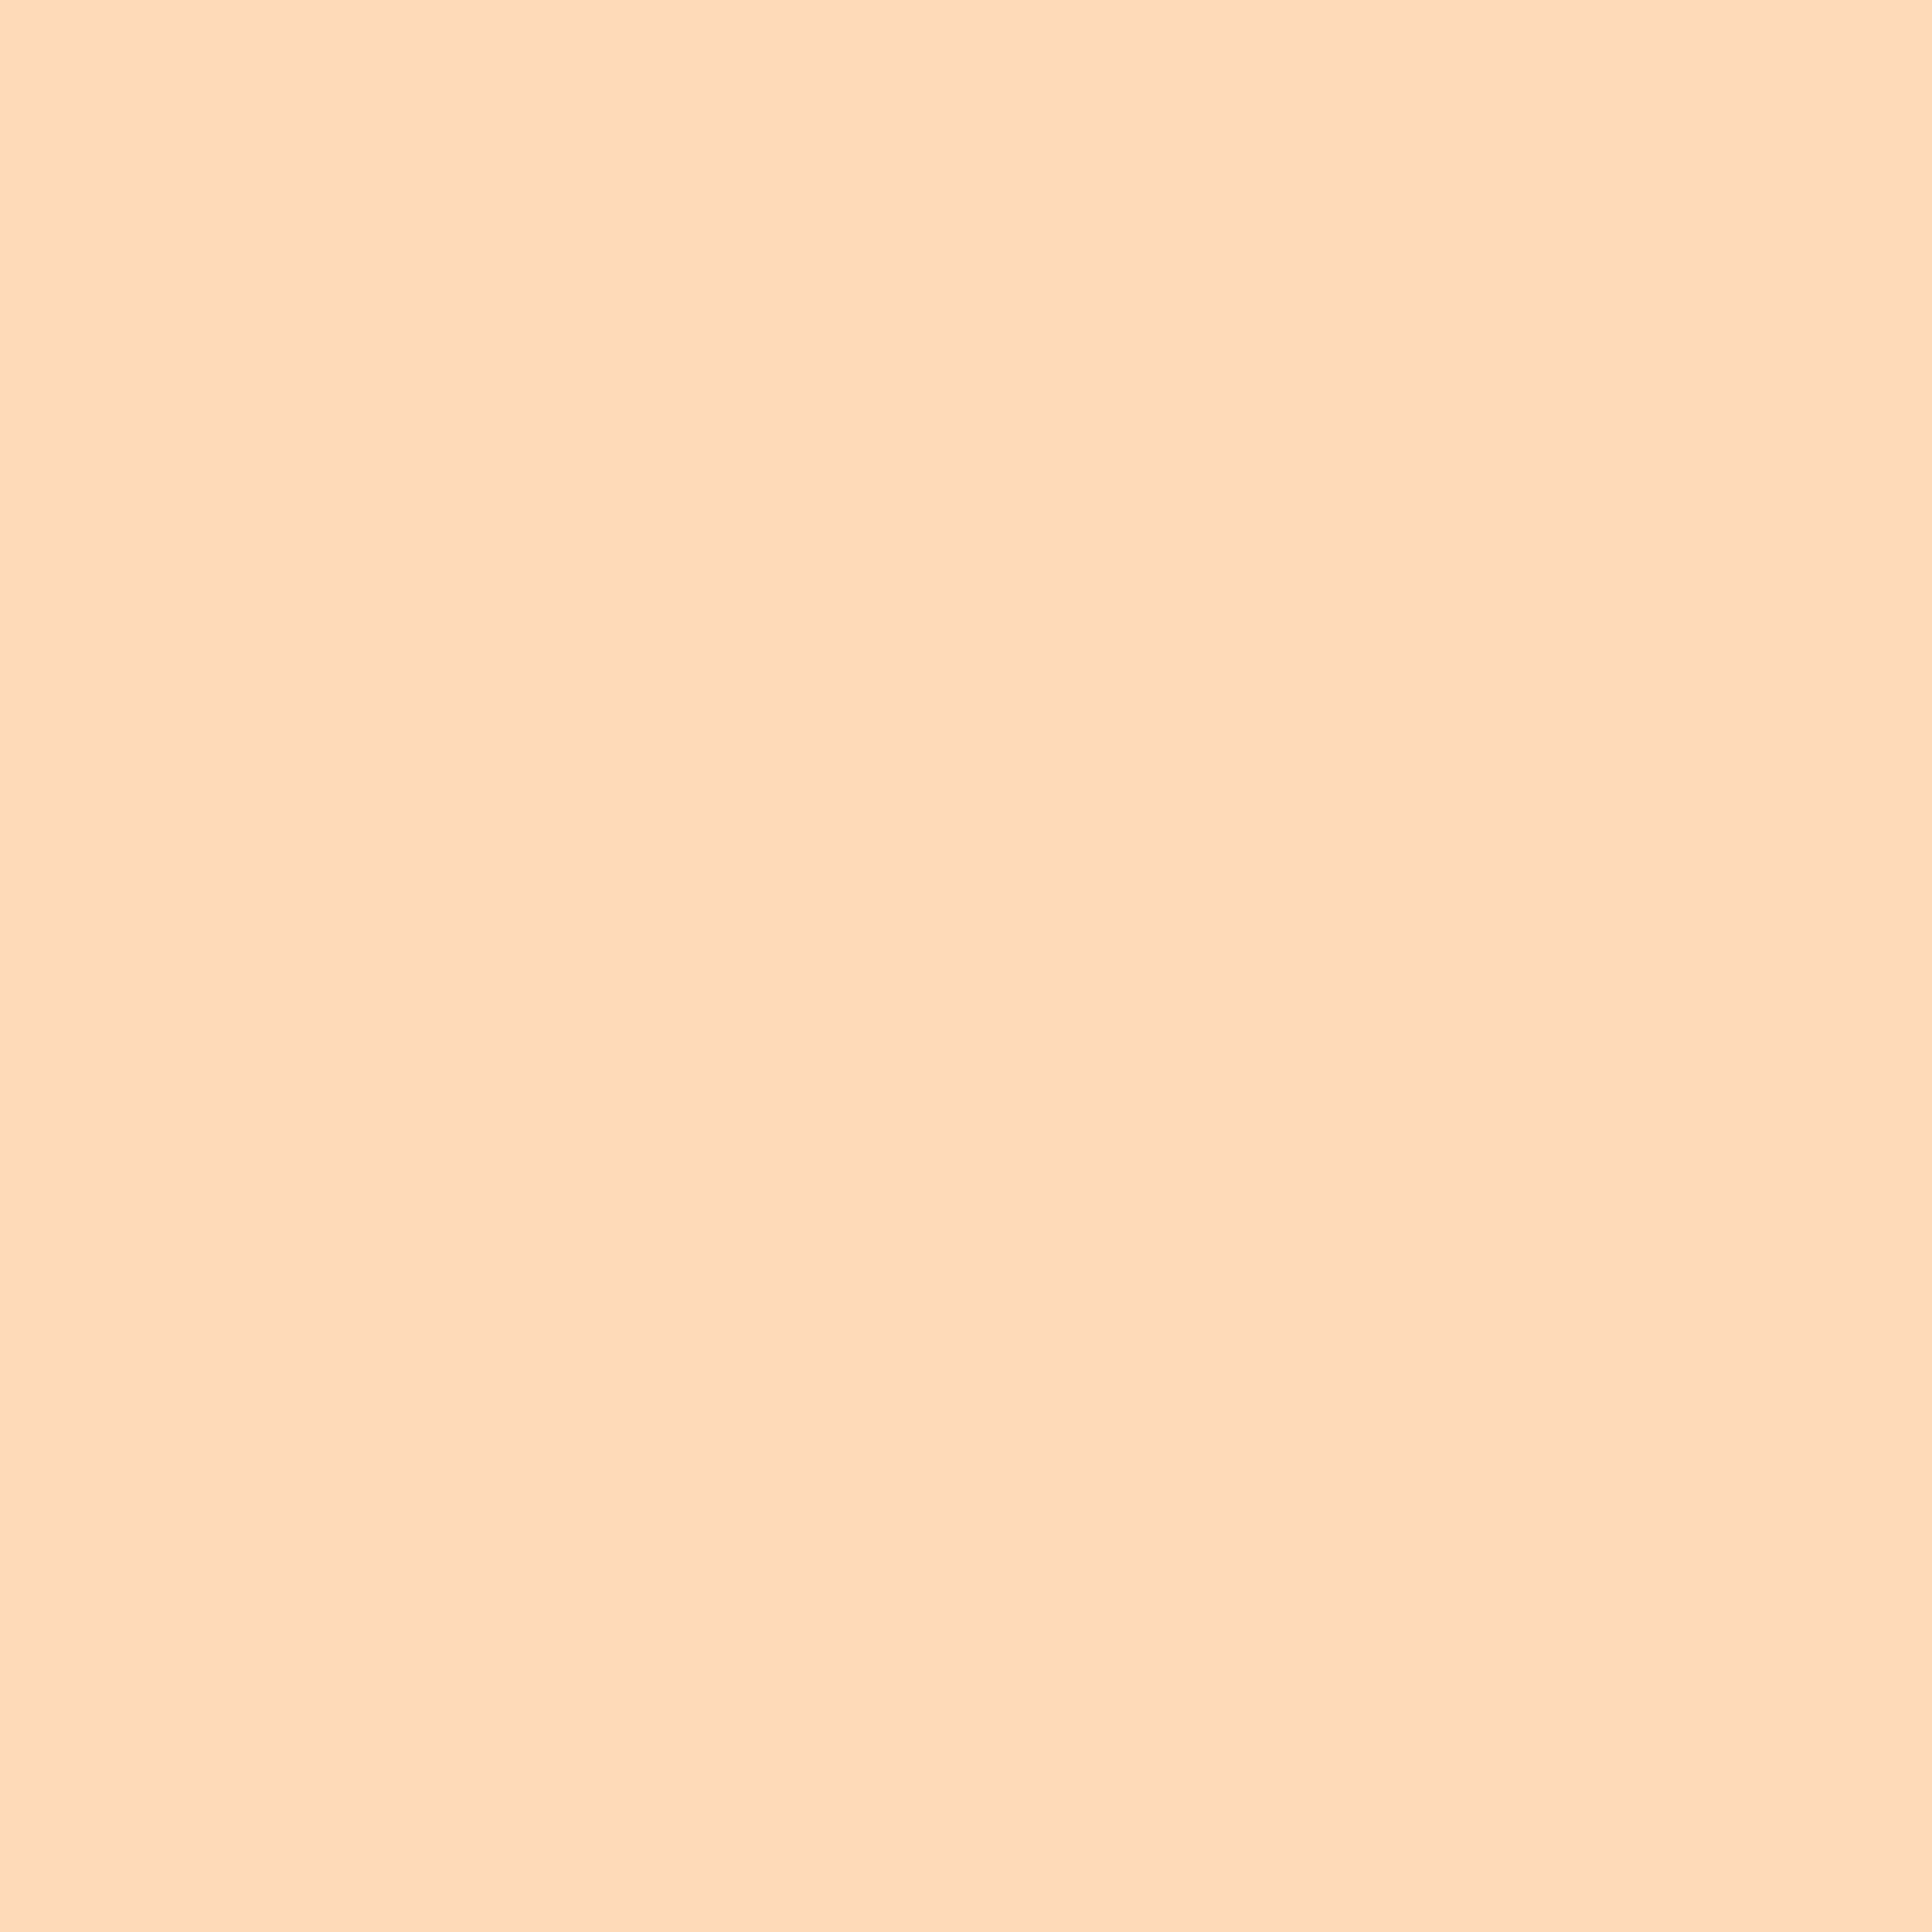 3600x3600 Peach Puff Solid Color Background